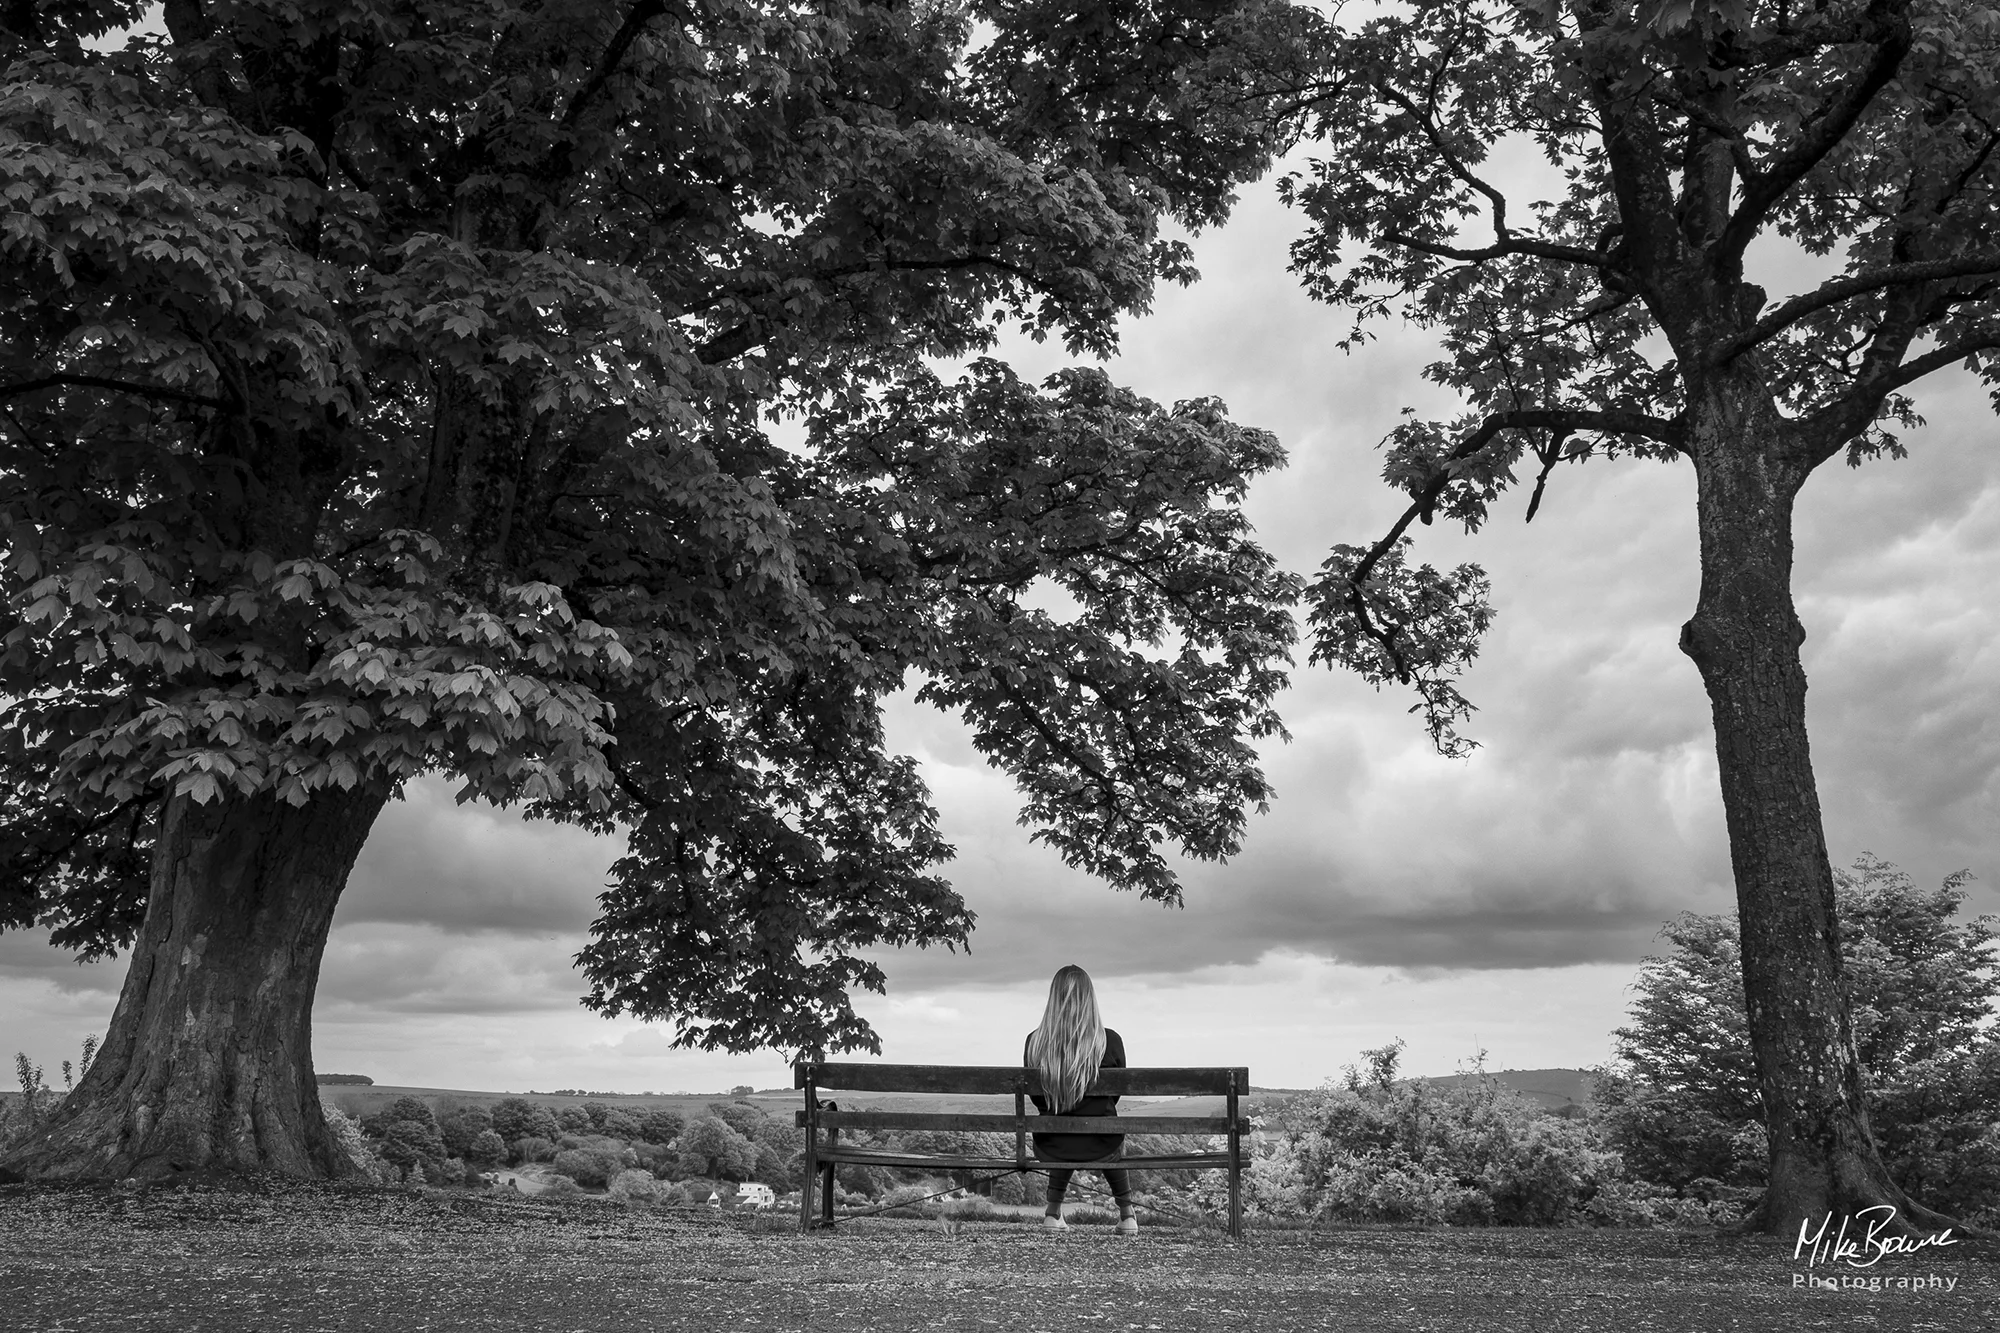 Woman sitting alone on a bench between two trees admiring cloudy sky over a valley